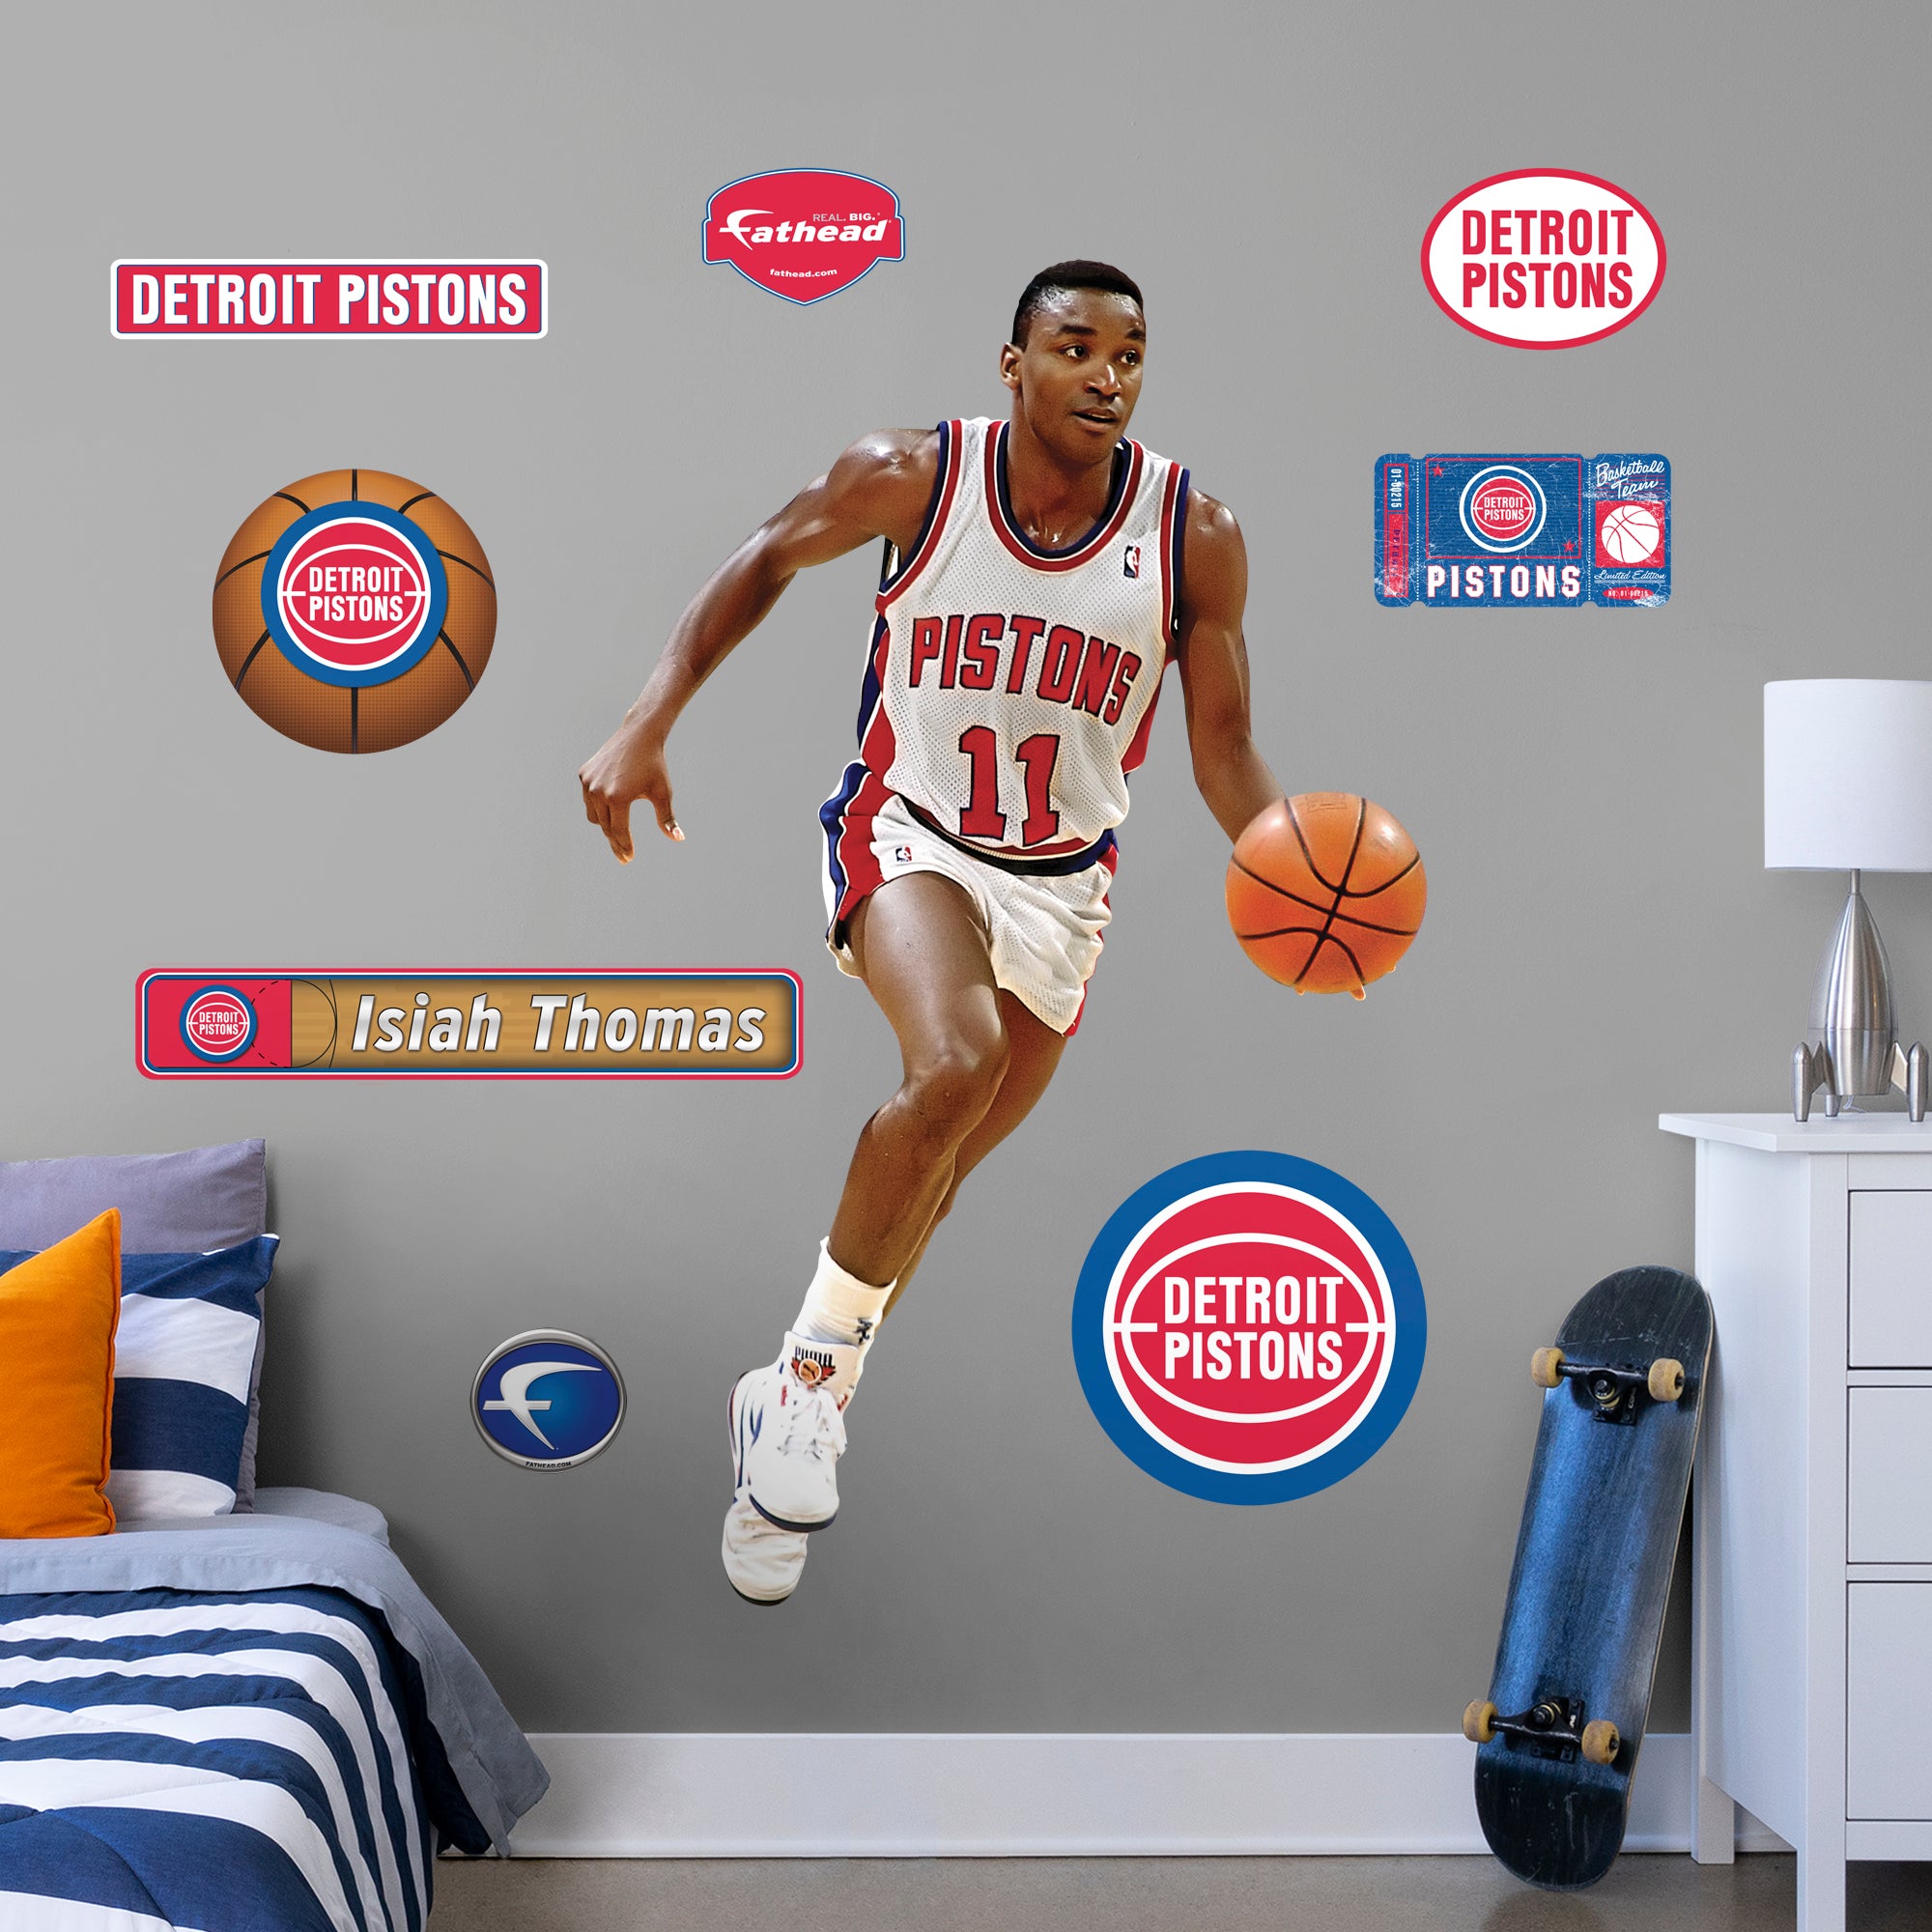 Isaiah Thomas Legend - Officially Licensed NBA Removable Wall Decal Life-Size Athlete + 8 Decals (48"W x 76"H) by Fathead | Viny